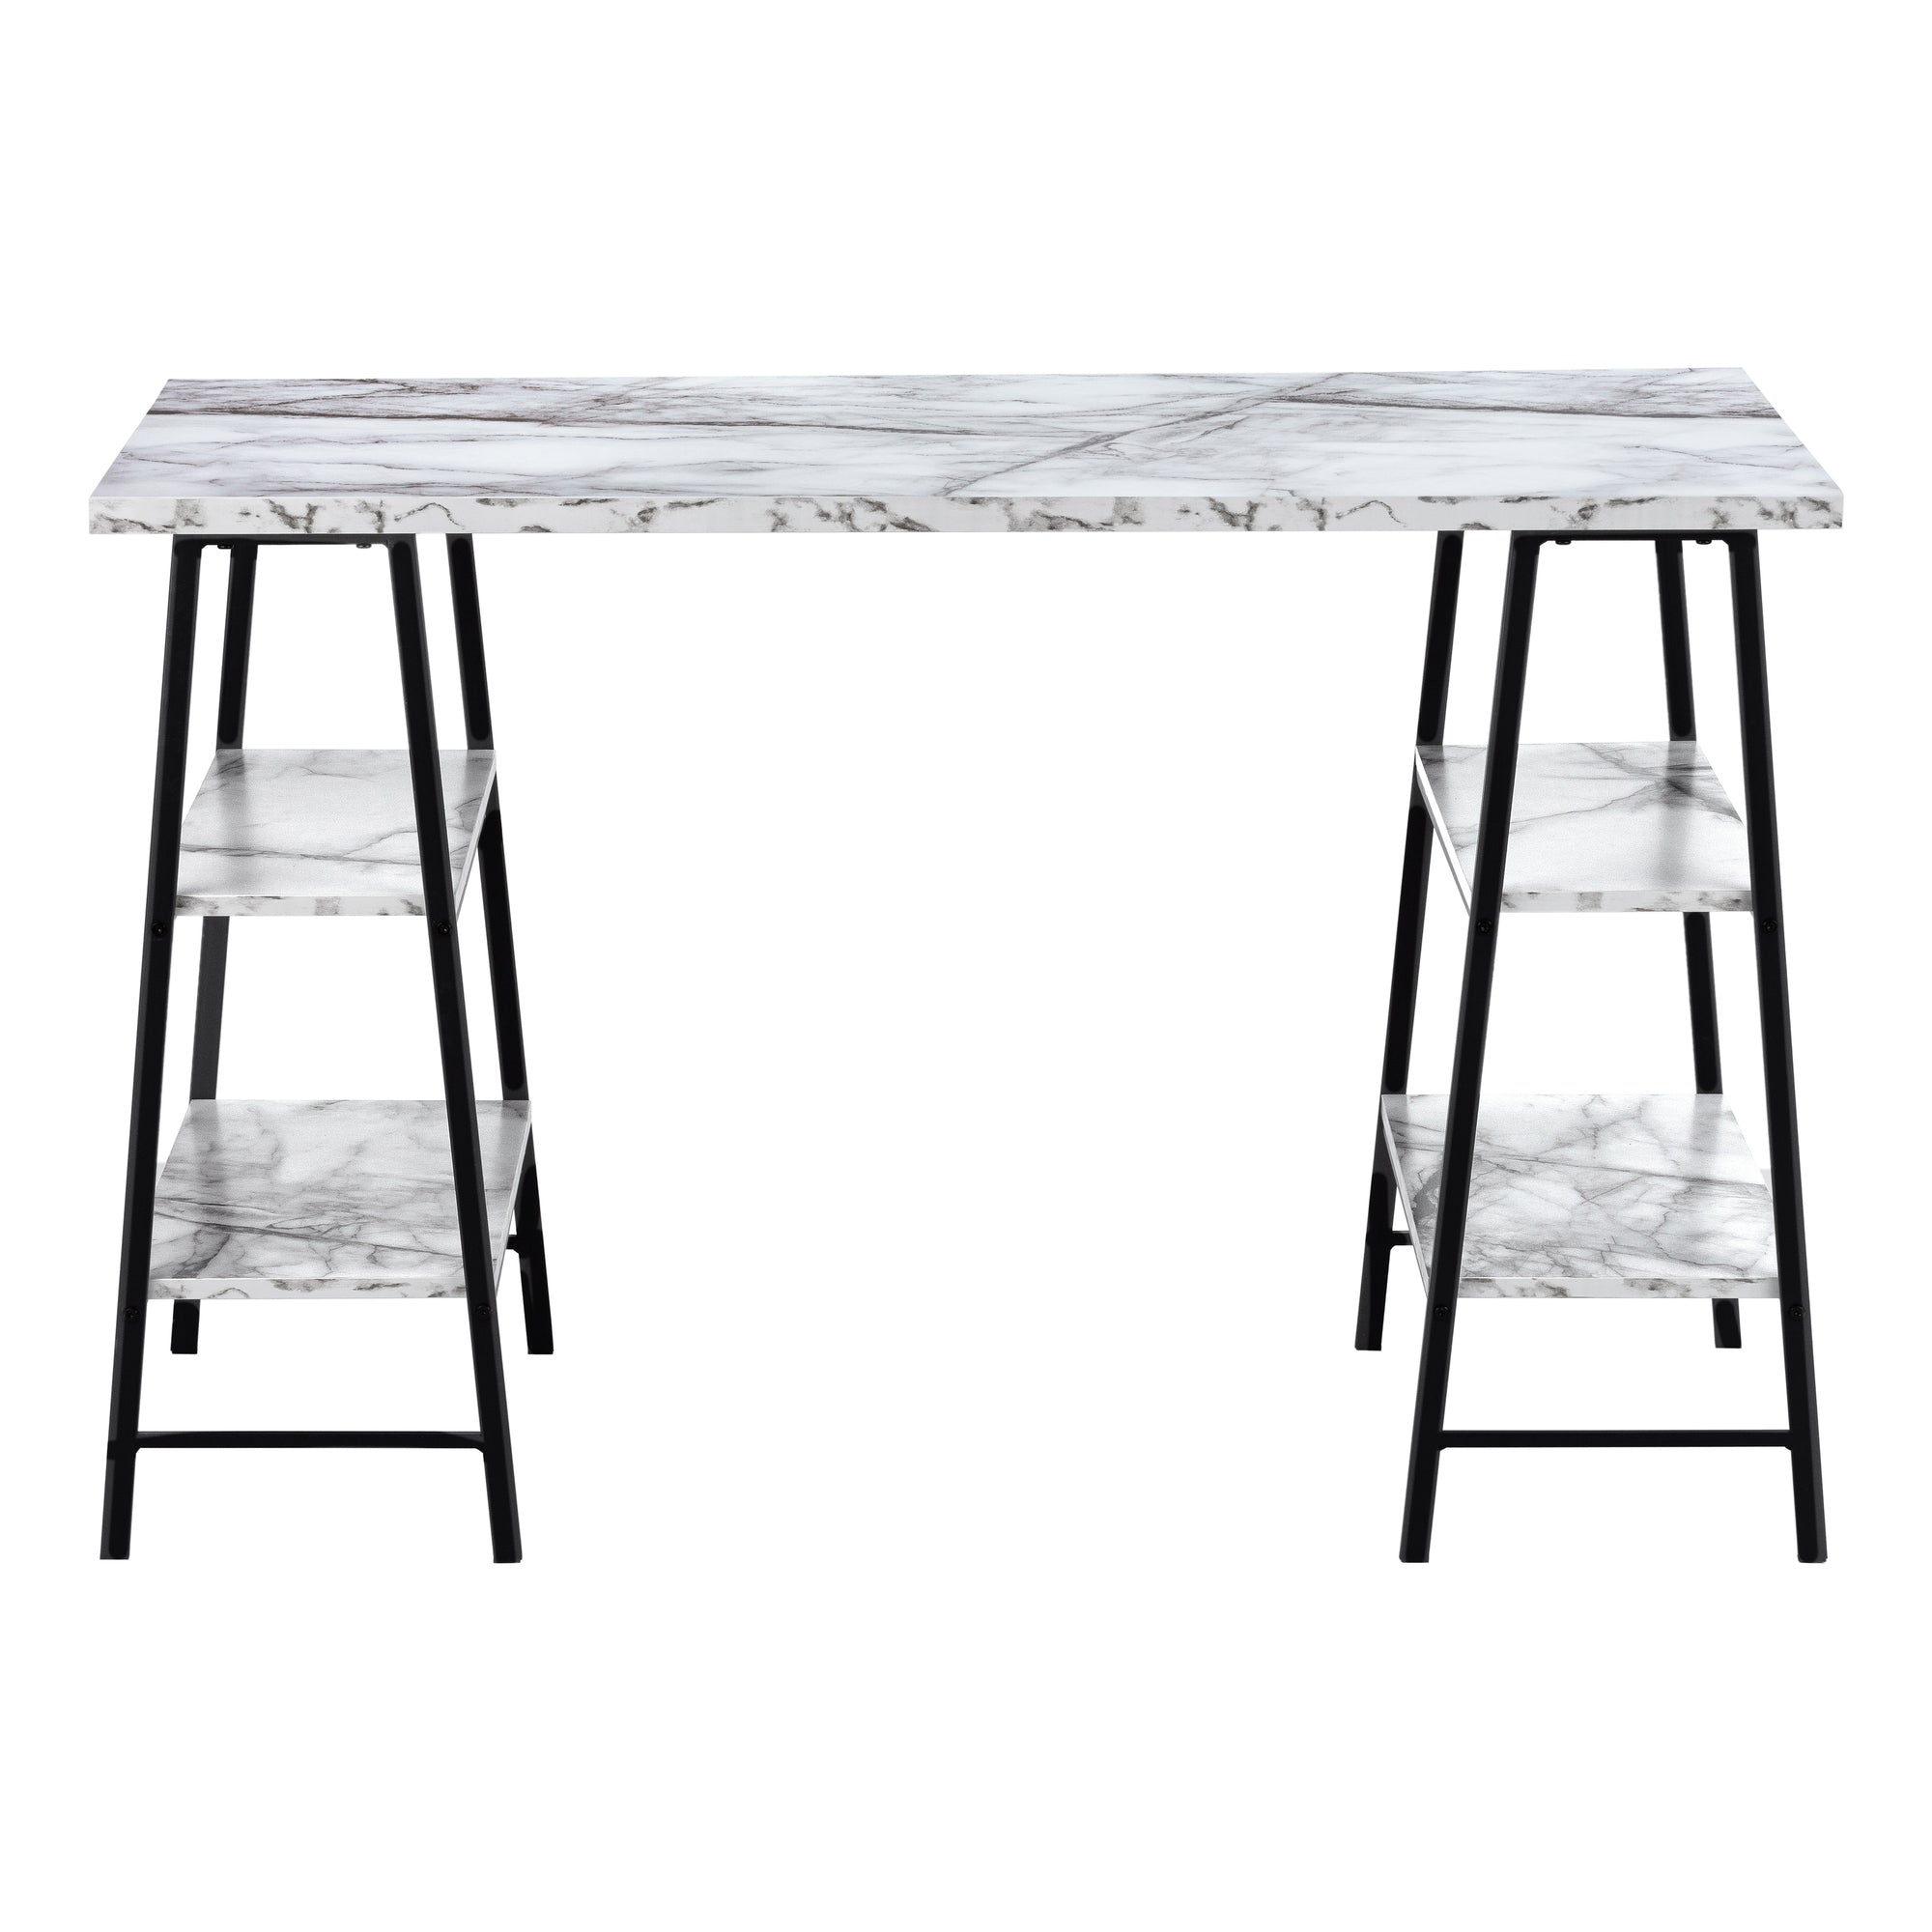 MN-617527    Computer Desk, Home Office, Laptop, Storage Shelves, 48"L, Metal, Laminate, White Marble Look, Contemporary, Modern